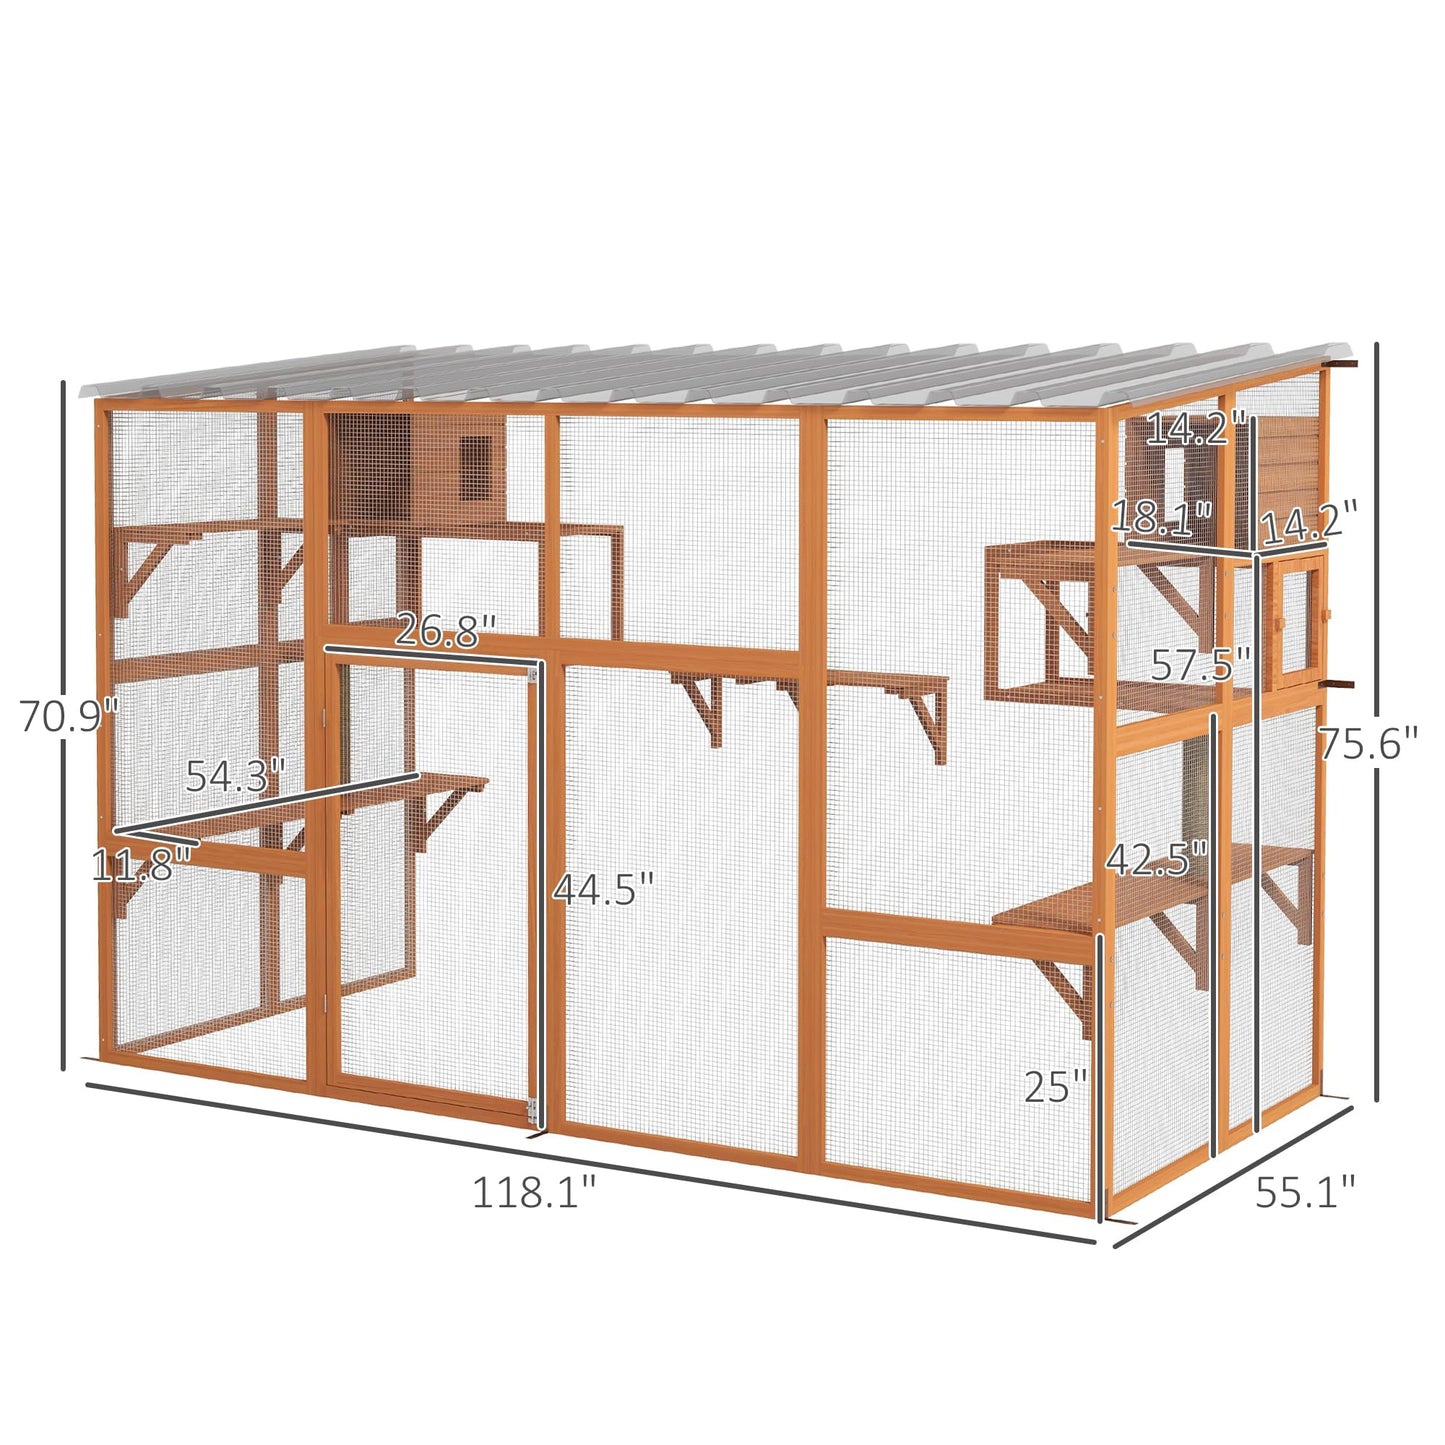 PawHut Catio, Outdoor Cat Enclosure Window Box, Wooden Cat House Playground with Scratching Posts, Weather Protection Roof for 1-5 Kitties, Resting Boxes, 118" x 55" x 75.5", Orange